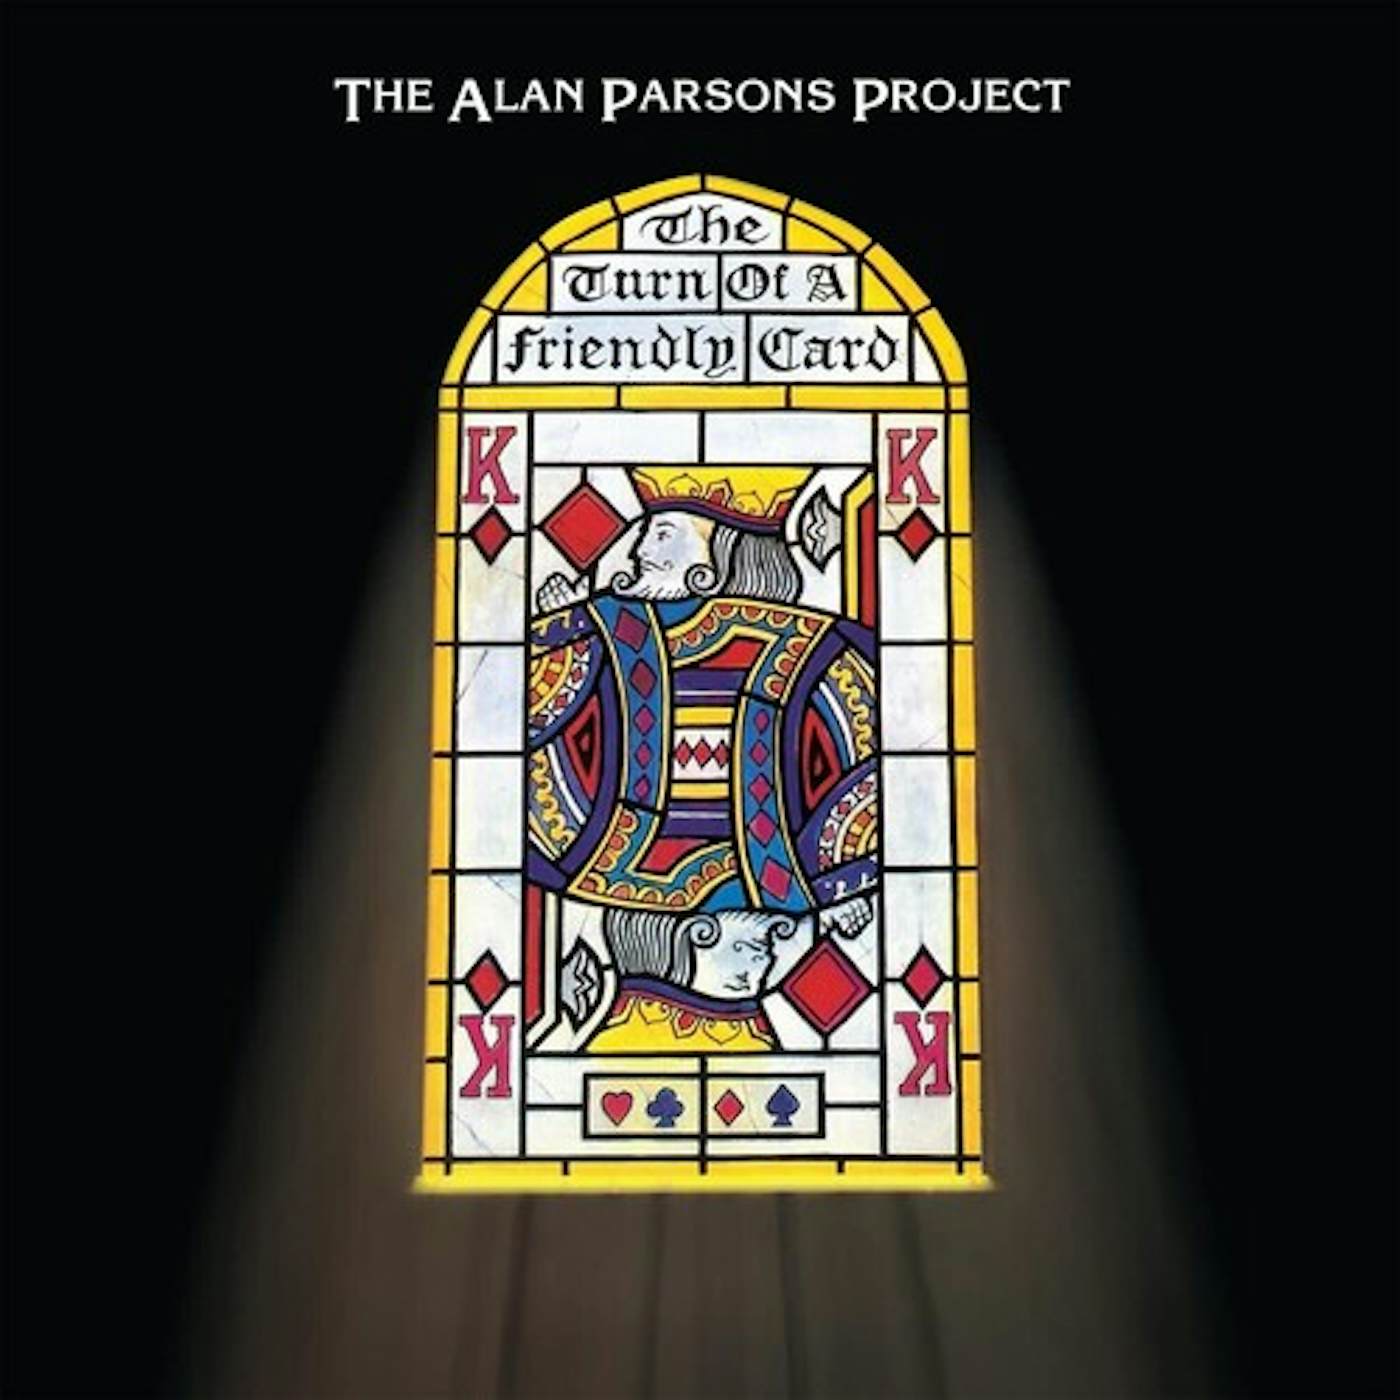 The Alan Parsons Project TURN OF A FRIENDLY CARD Blu-ray